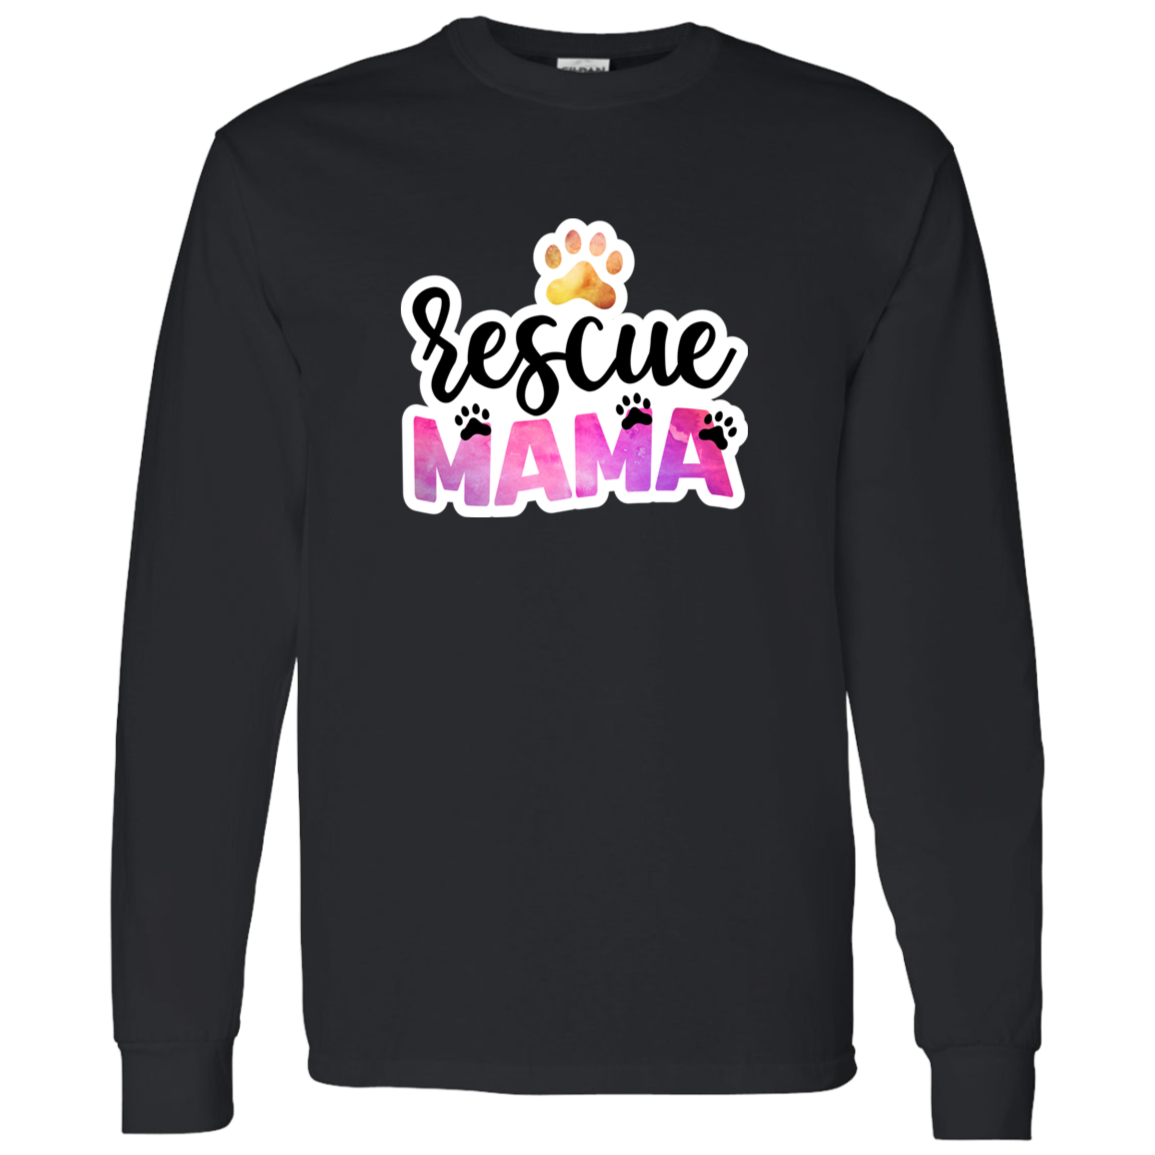 Rescue Mama Dog Paw Watercolor Long Sleeve T-Shirt